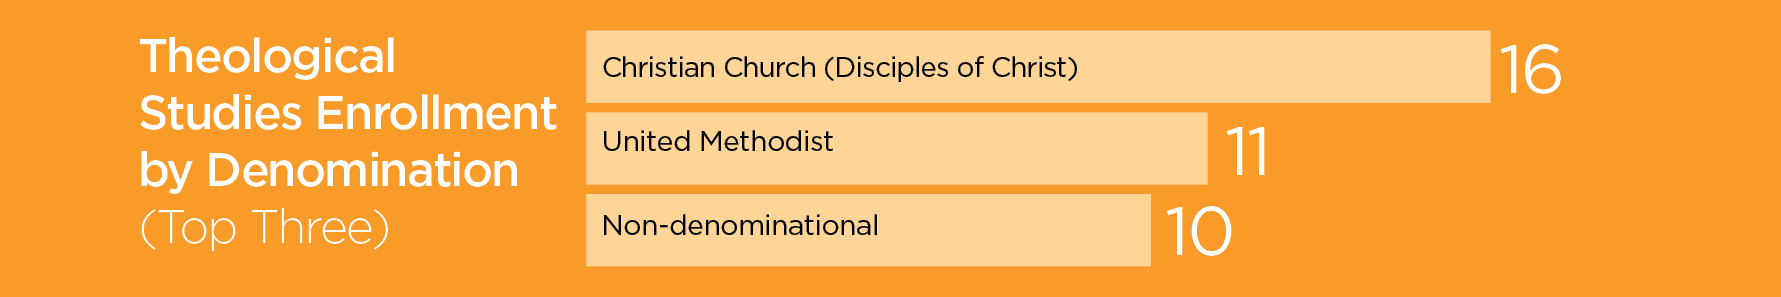 Bar Chart Showing "Theological Studies Enrollment by Denomination (Top Three): Christian Church (Disciples of Christ) - 16, United Methodist - 11, Non-denominational - 10